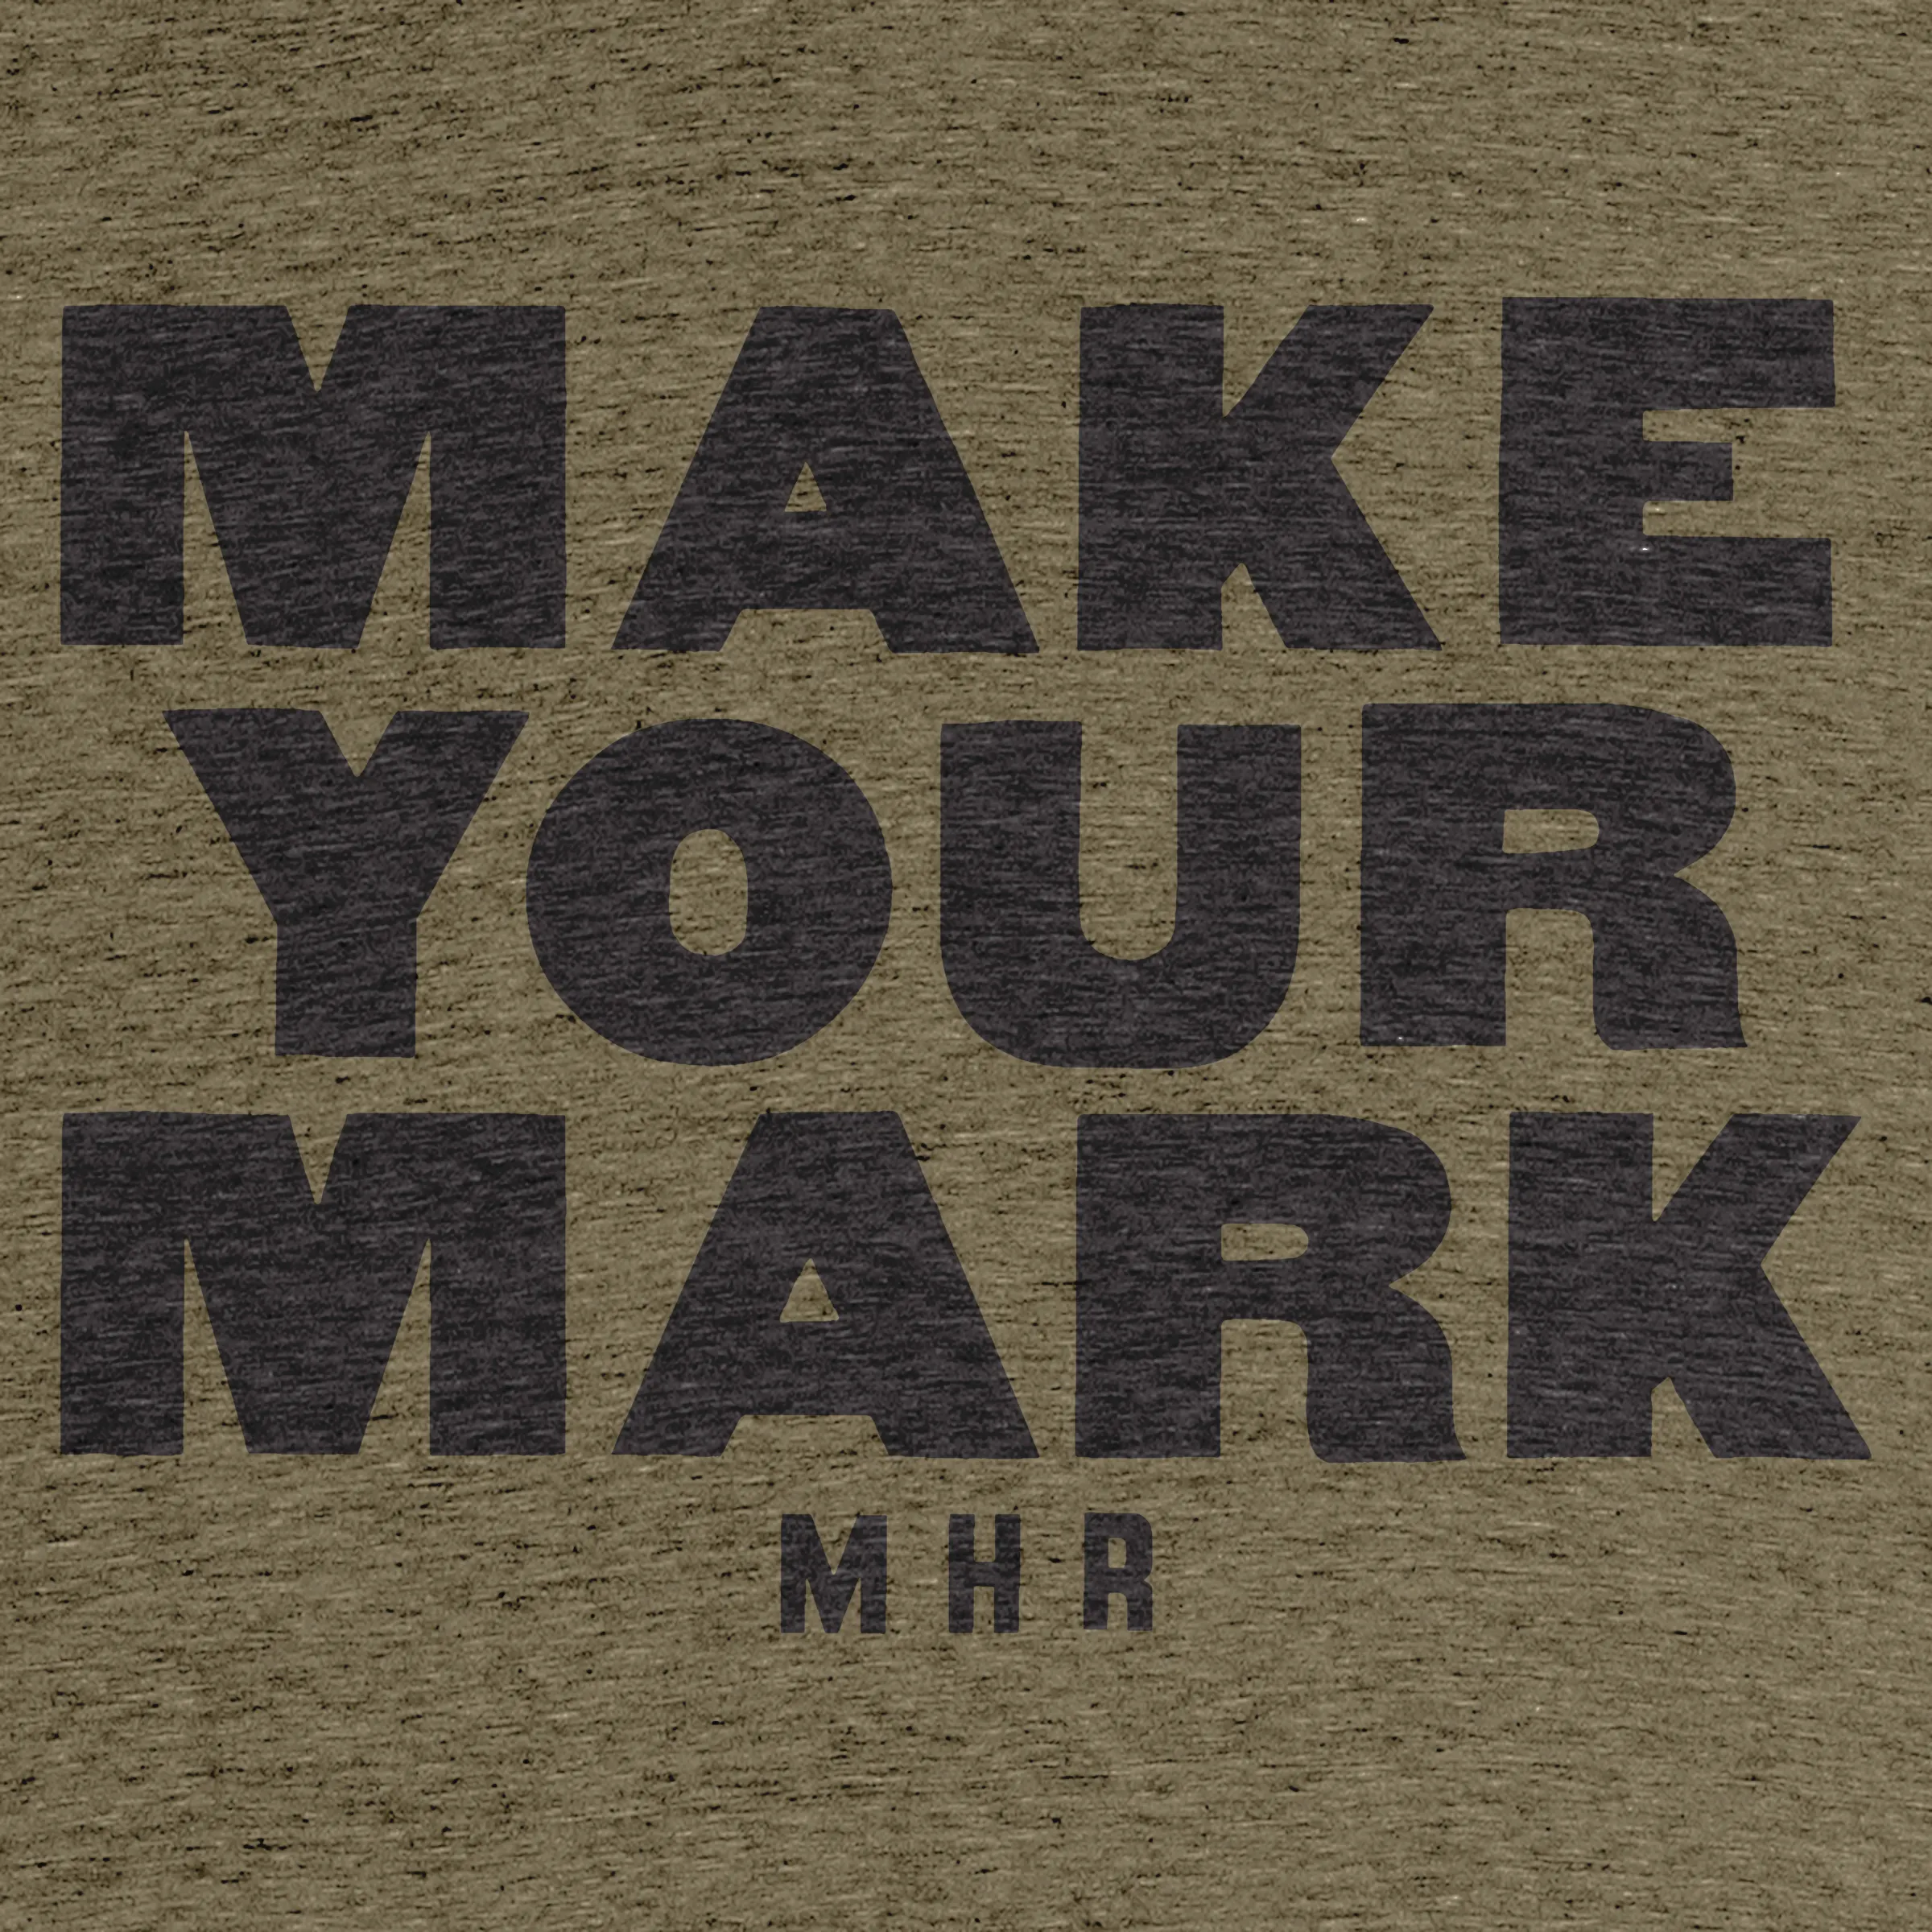 Make Your Mark” graphic tee, pullover hoodie, onesie, tank, and